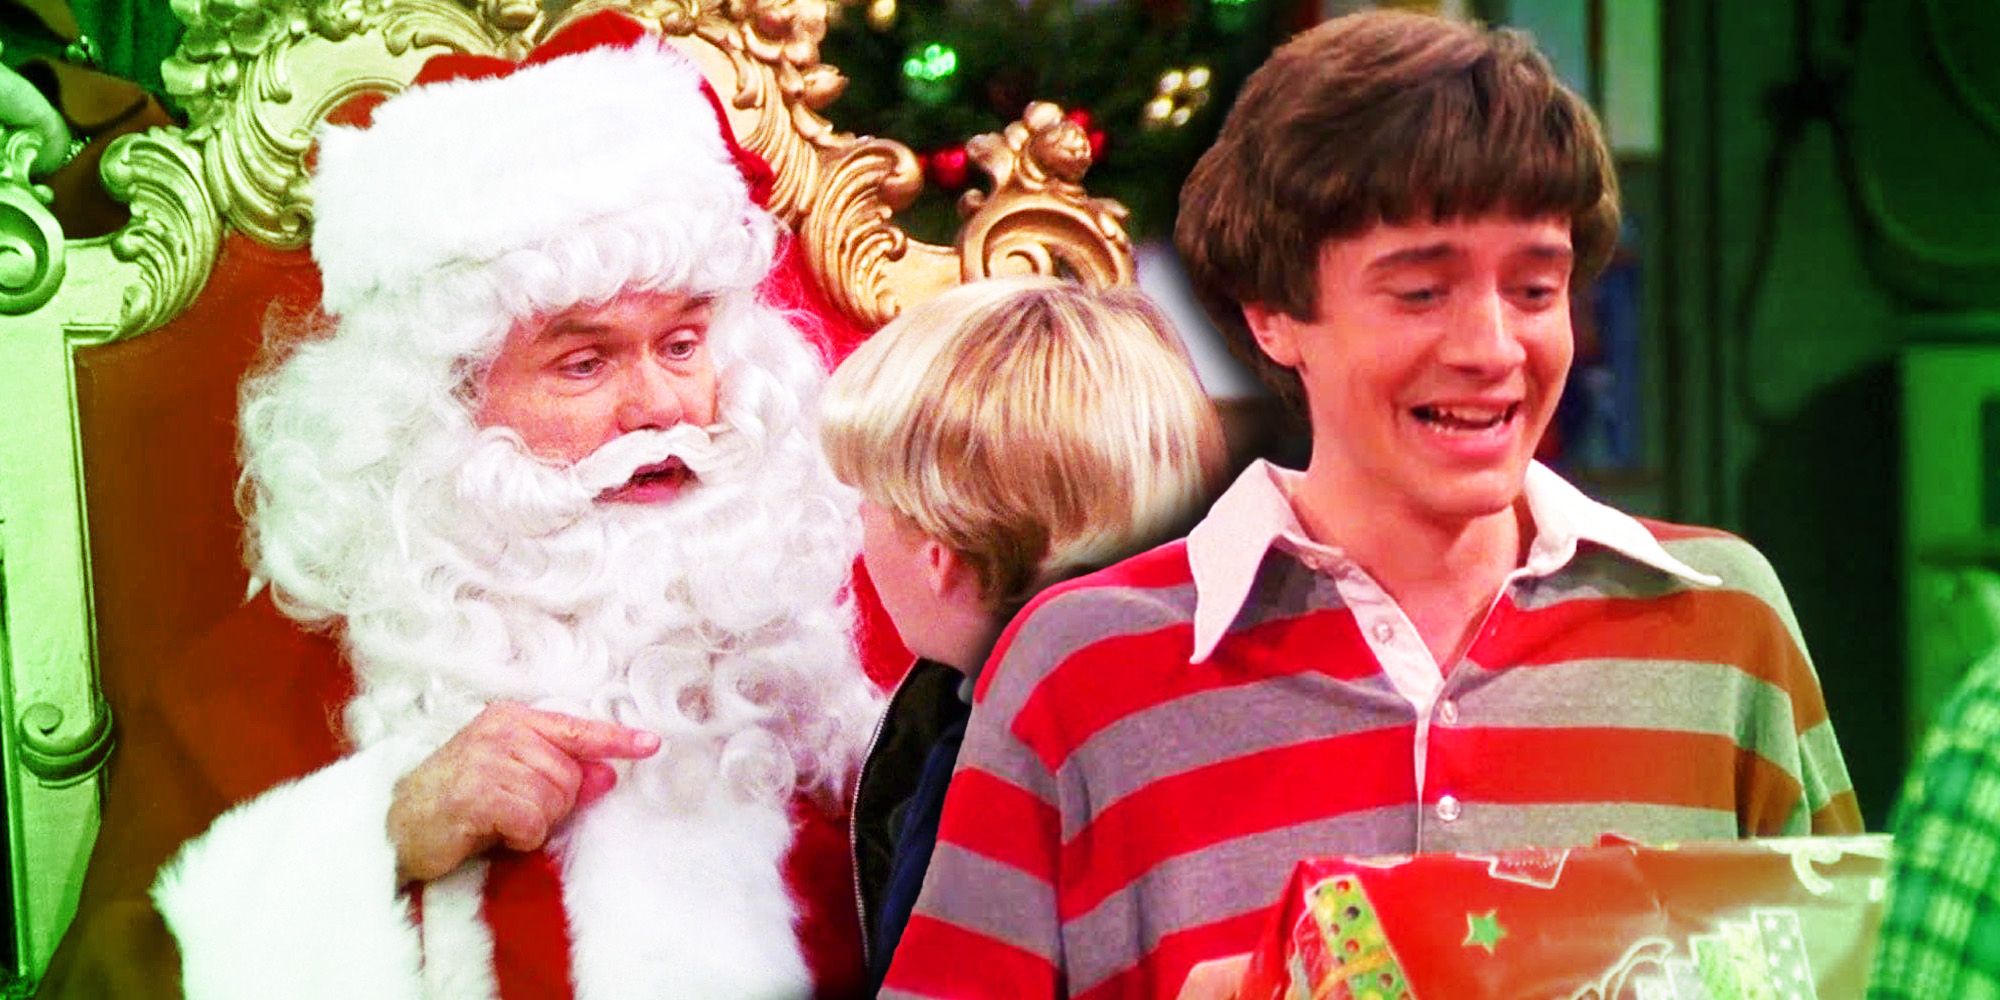 Red dressed up as Santa Claus and Eric holding a present in That '70s Show.